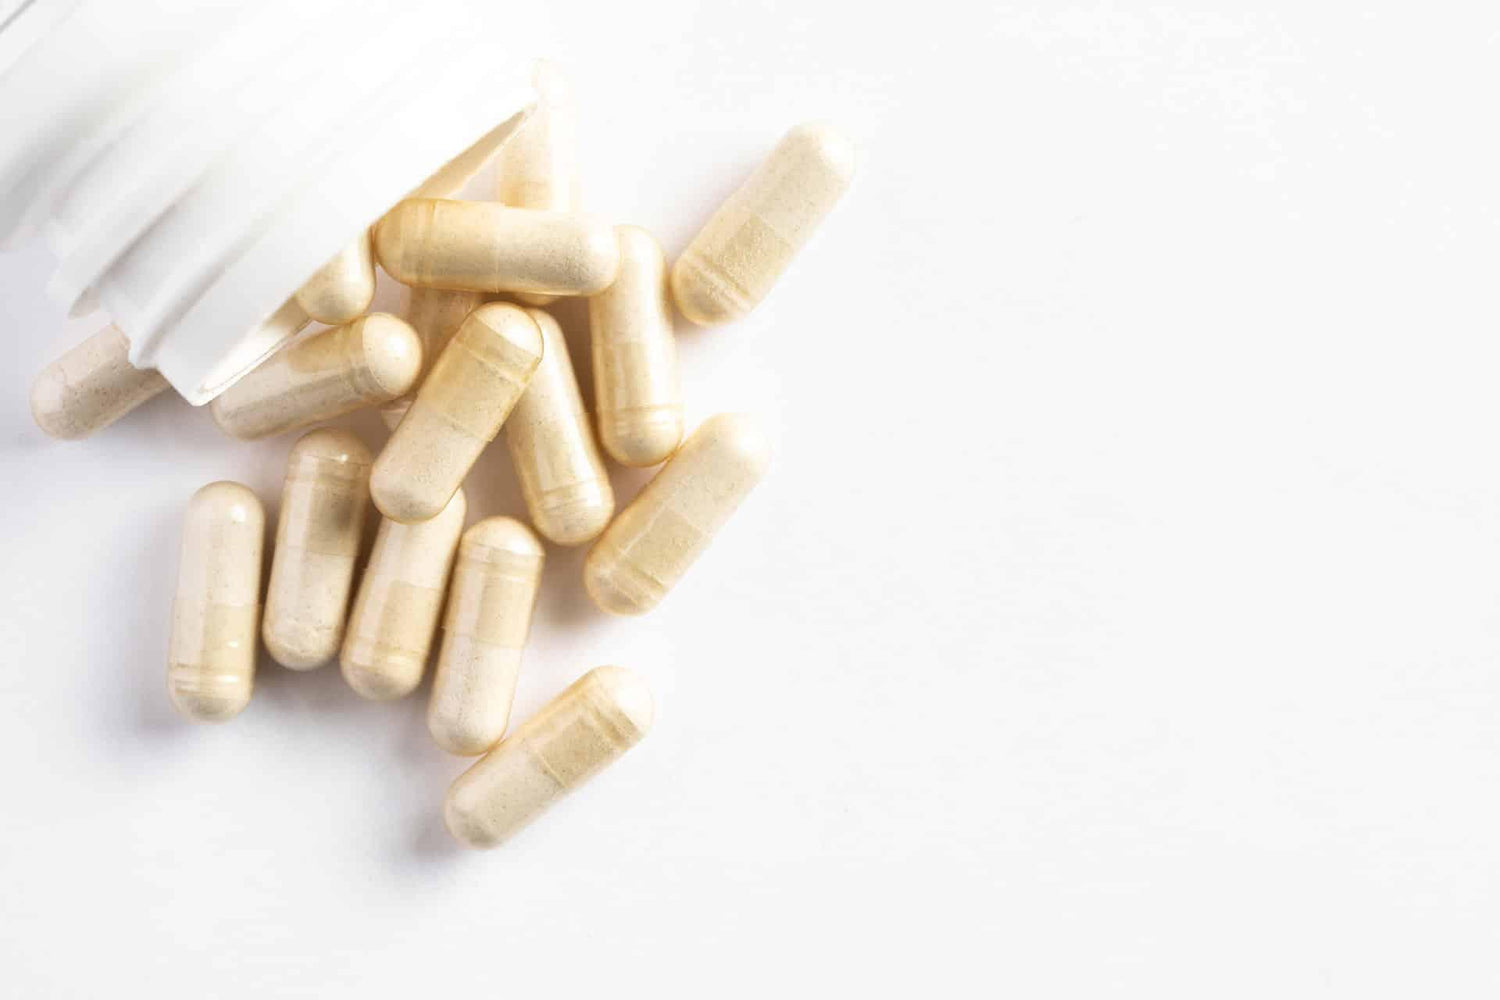 Top view closeup of probiotic capsules and bottle on white background